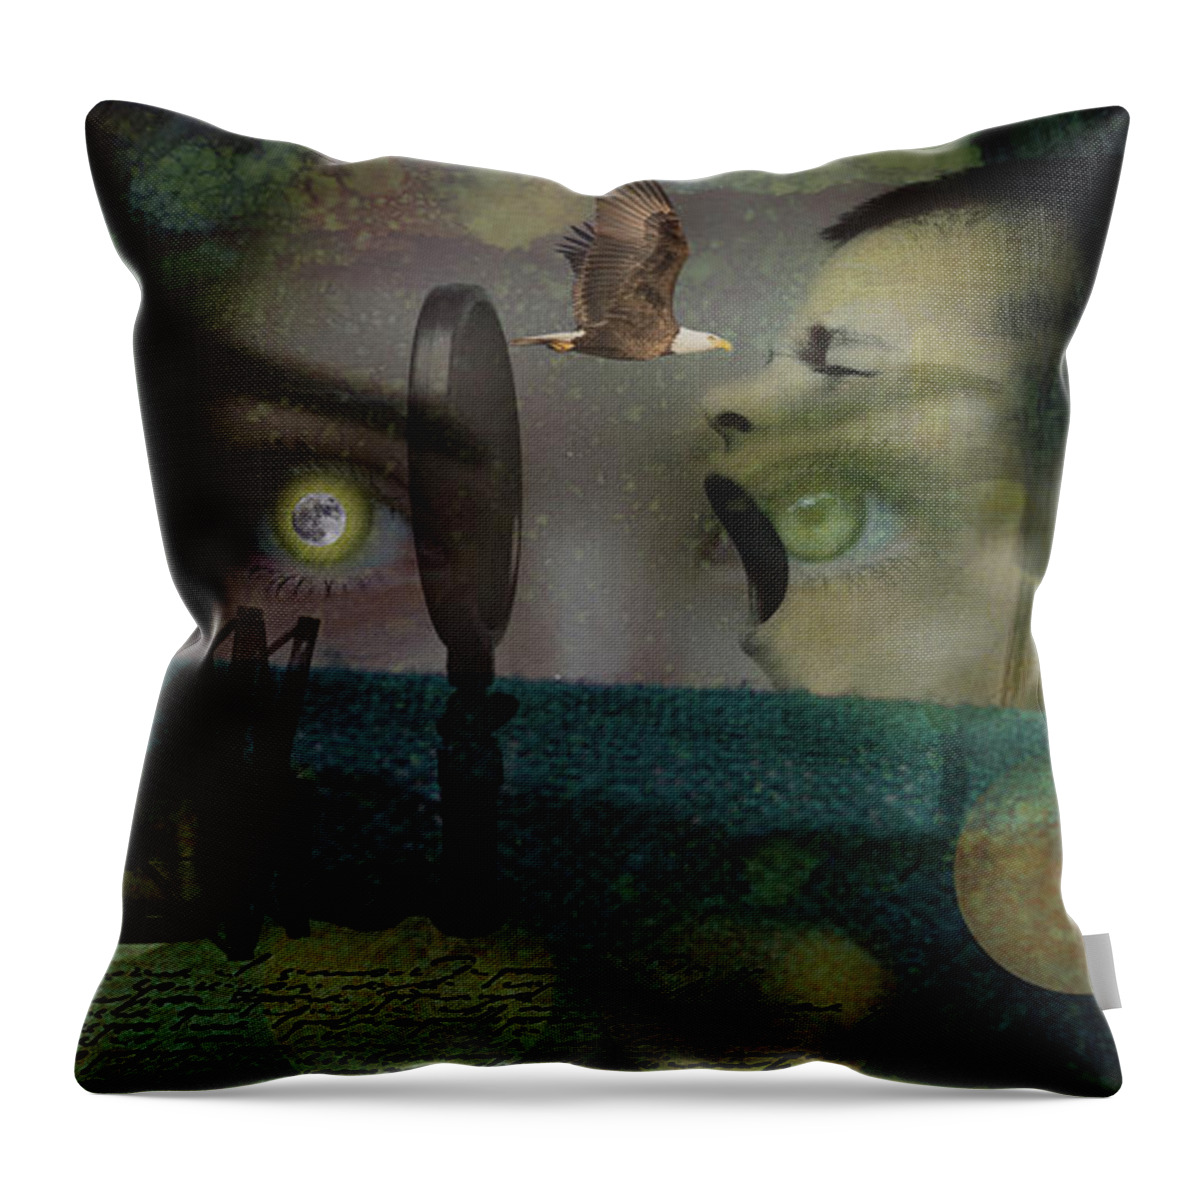 Humans Throw Pillow featuring the photograph Look at me by Ricardo Dominguez